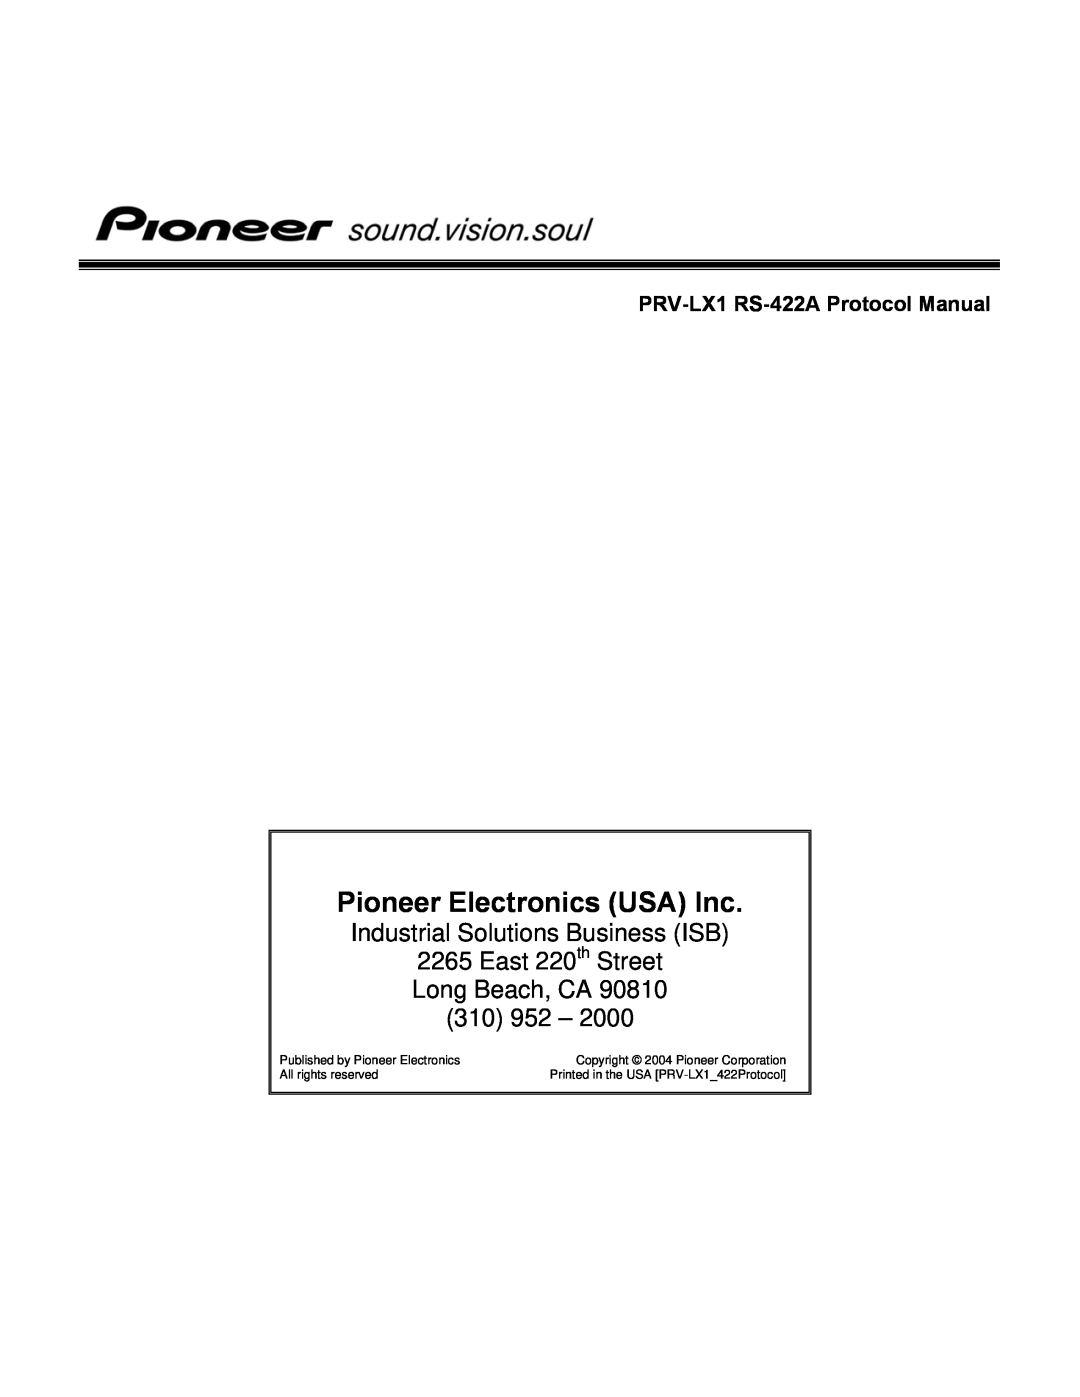 Pioneer manual Pioneer Electronics USA Inc, PRV-LX1 RS-422AProtocol Manual, Industrial Solutions Business ISB 